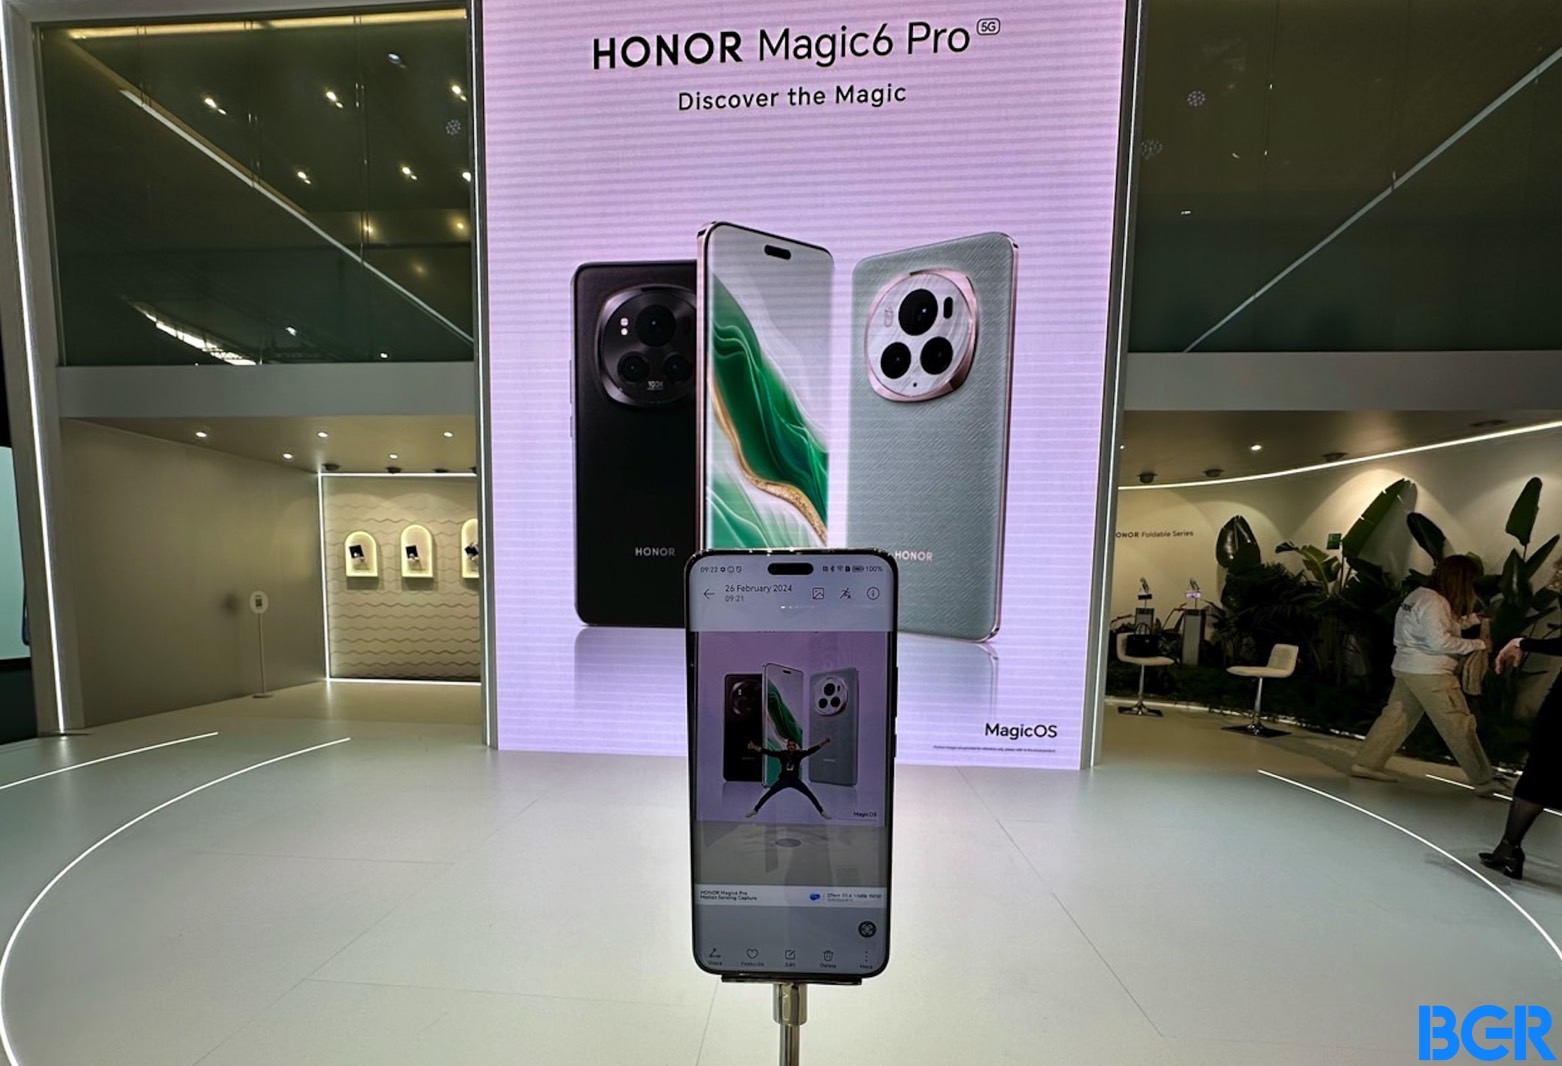 HONOR Magic 6 Pro to offer feature inspired by iPhone